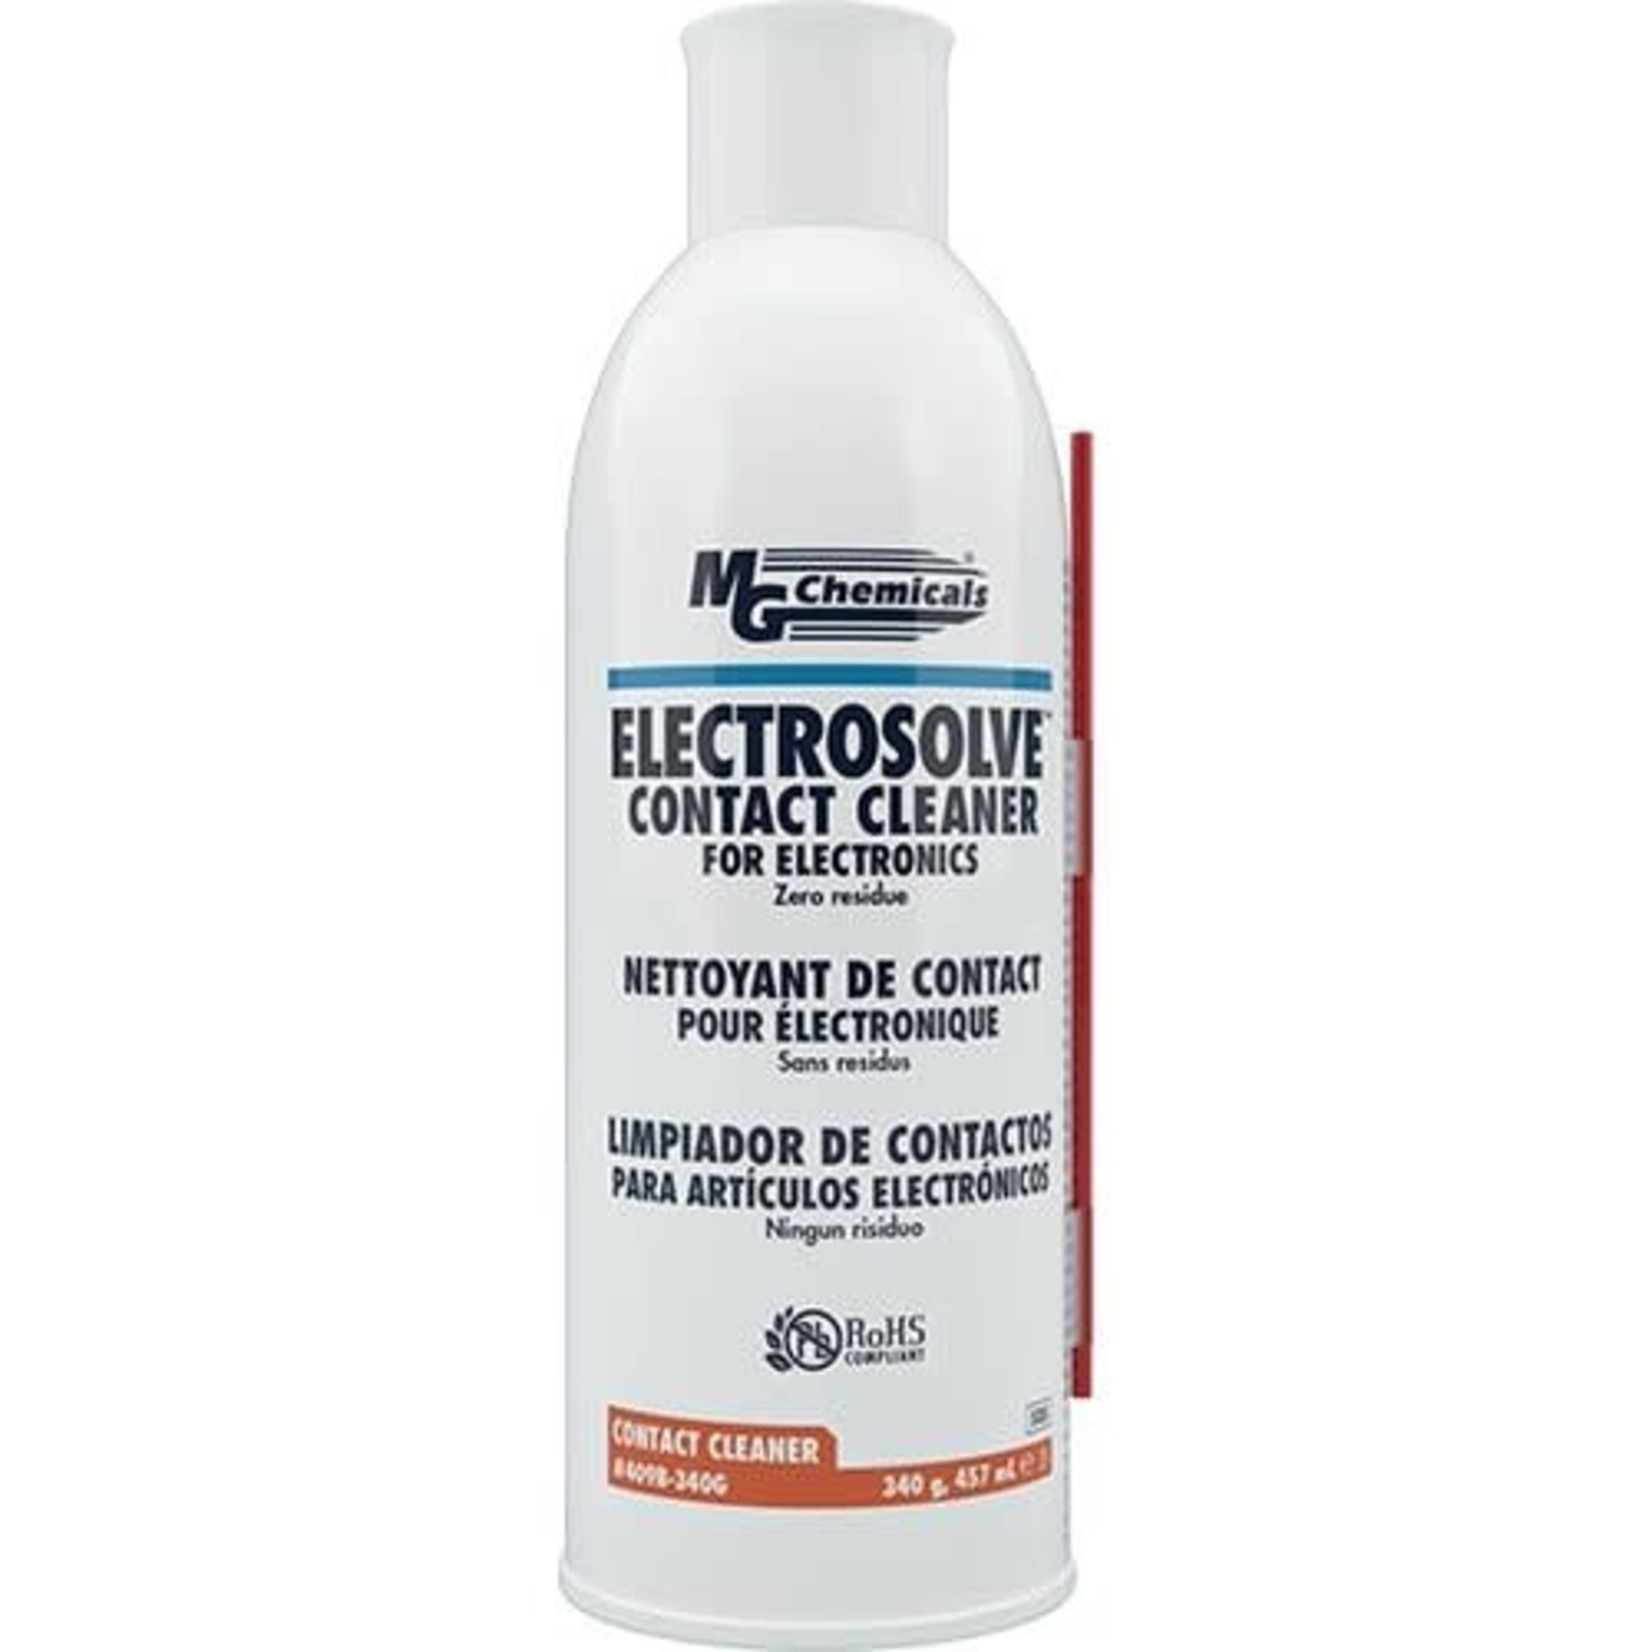 MGCHEMICALS MG CHEMICALS ELECTROSOLVE 340G CONTACT CLEANER